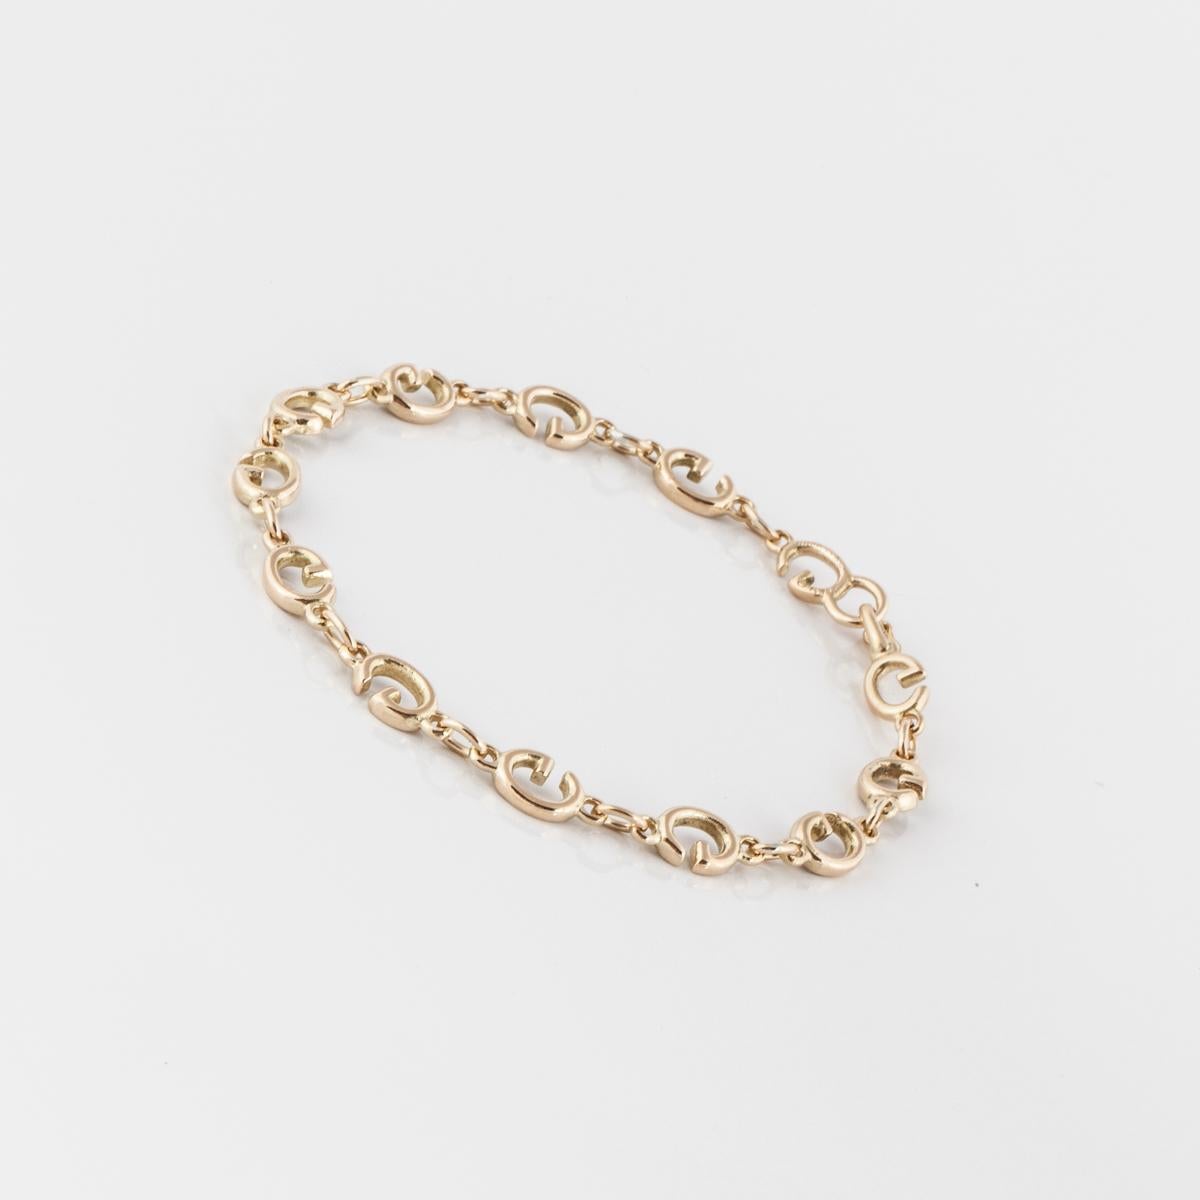 18K yellow gold bracelet by Gucci.  The links are the letter 